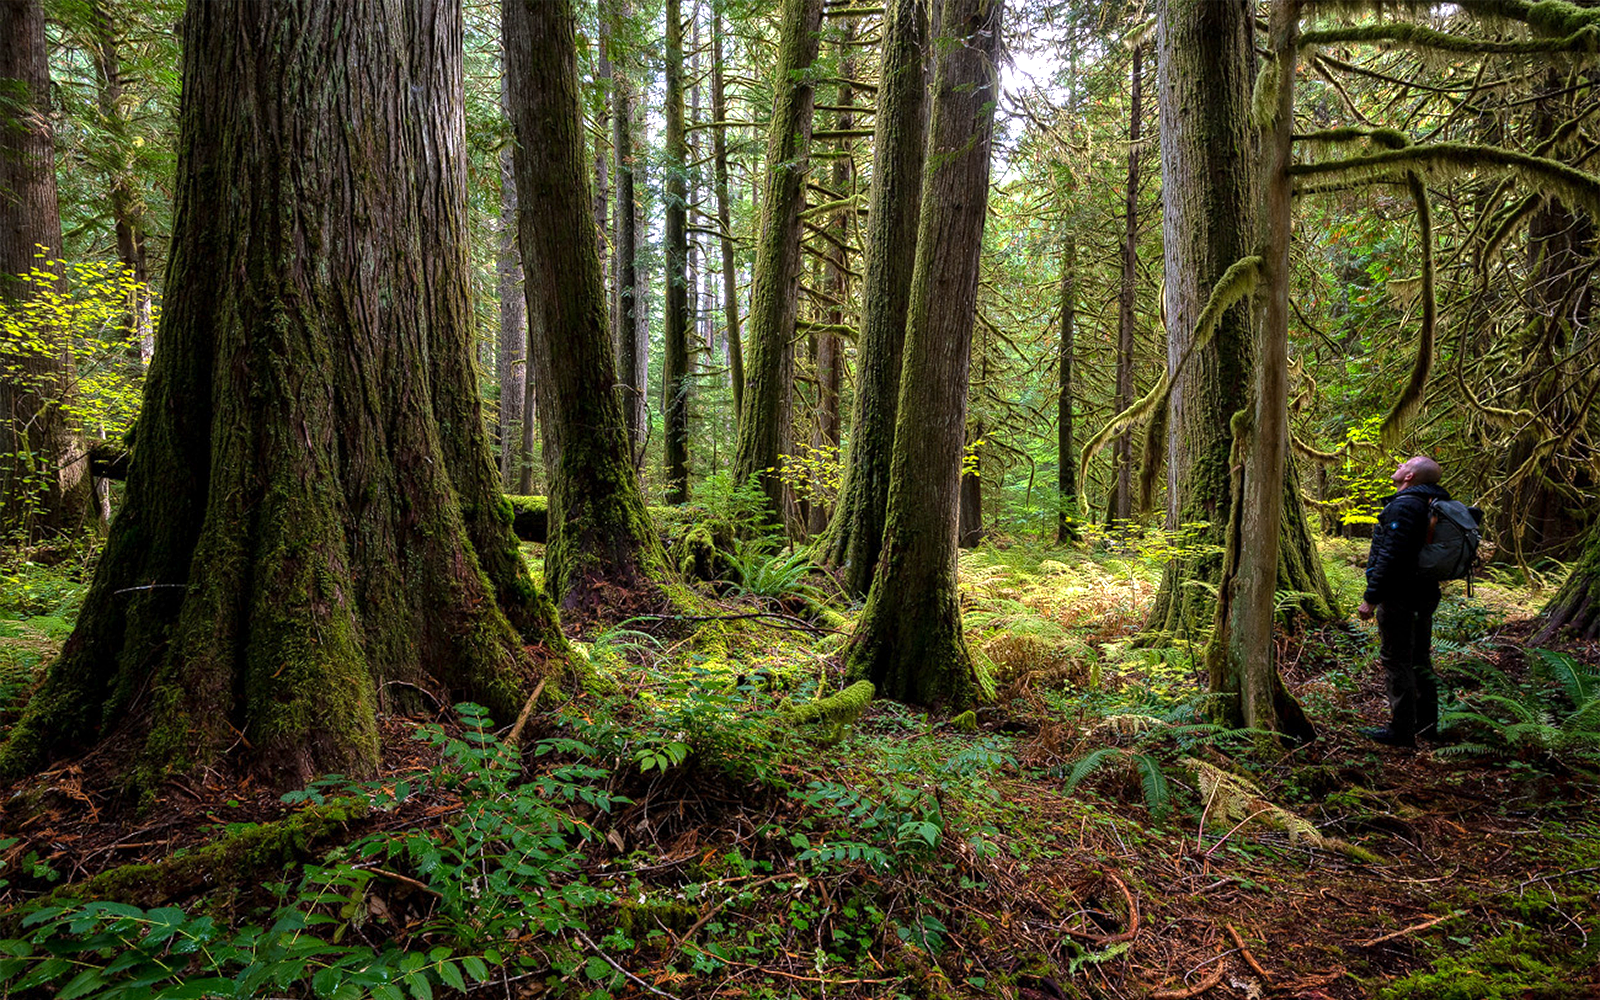 Press Release: Mature and old-growth logging sale undermines Biden climate policy; threatens McKenzie River, habitat